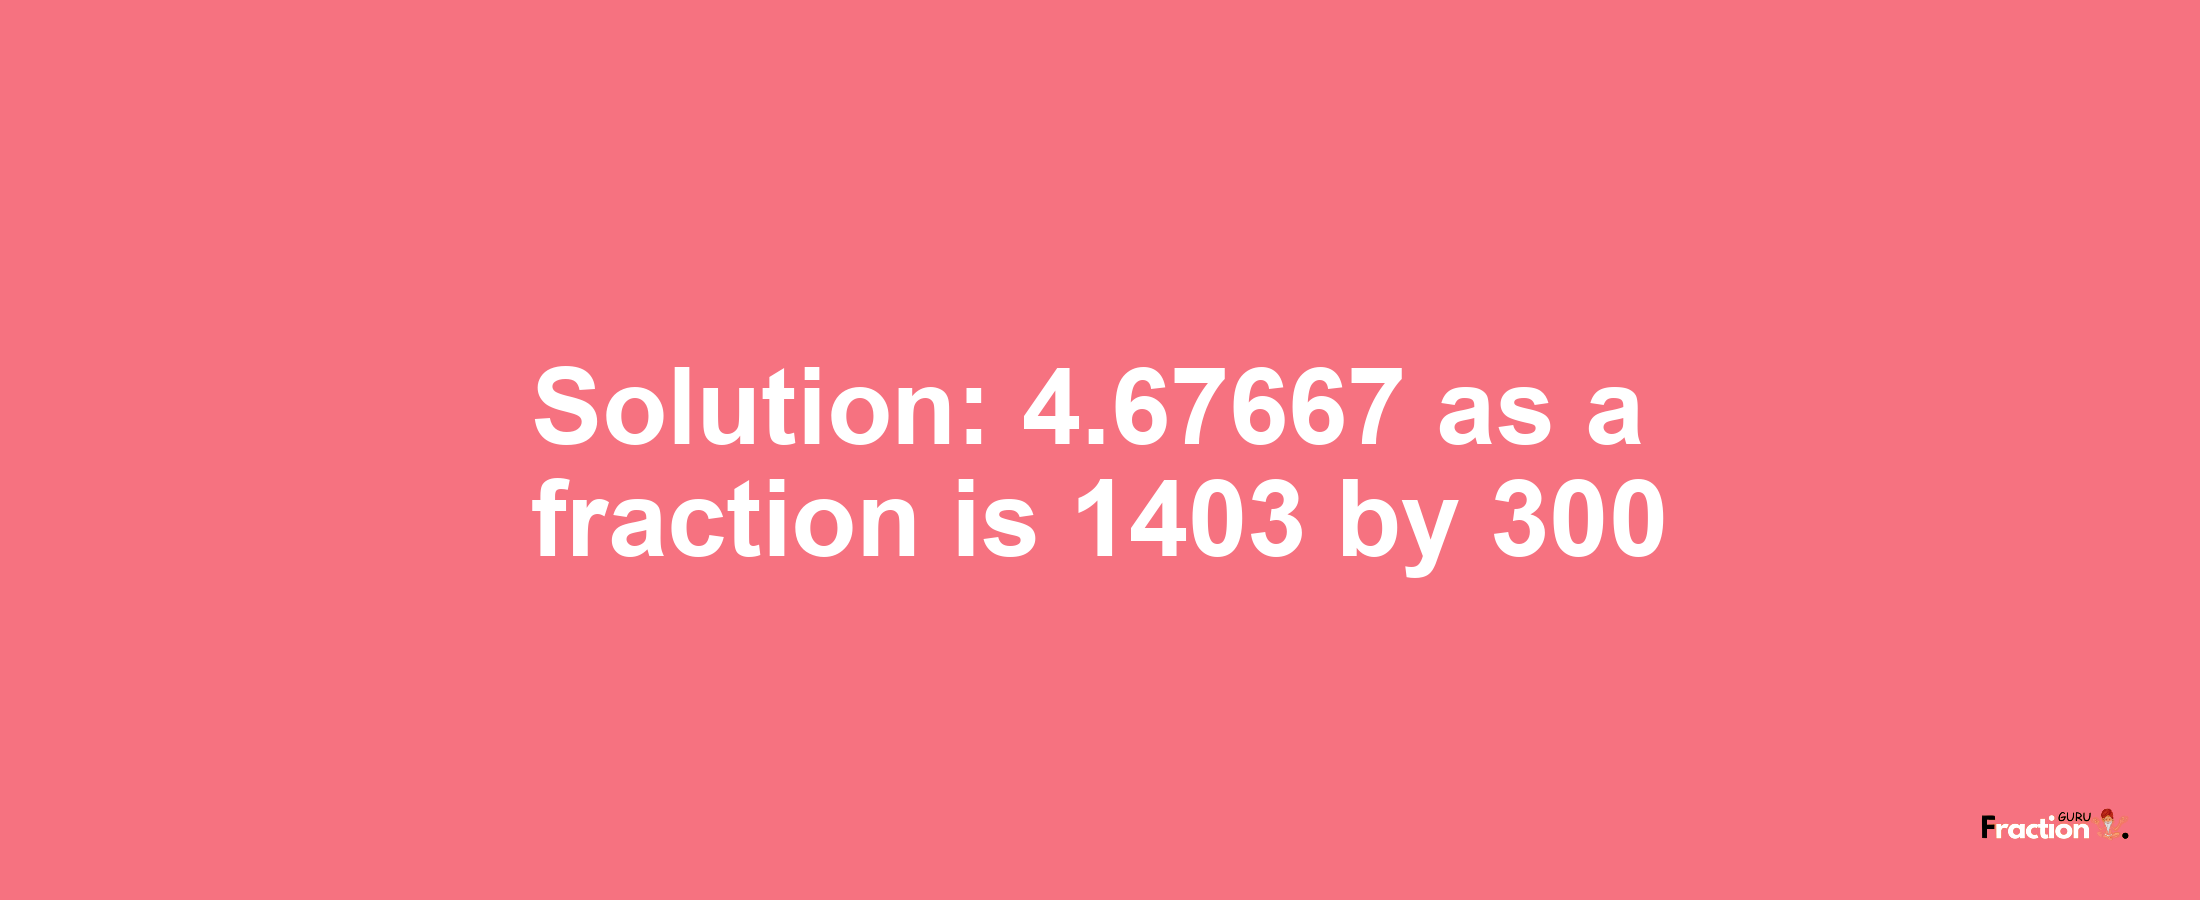 Solution:4.67667 as a fraction is 1403/300